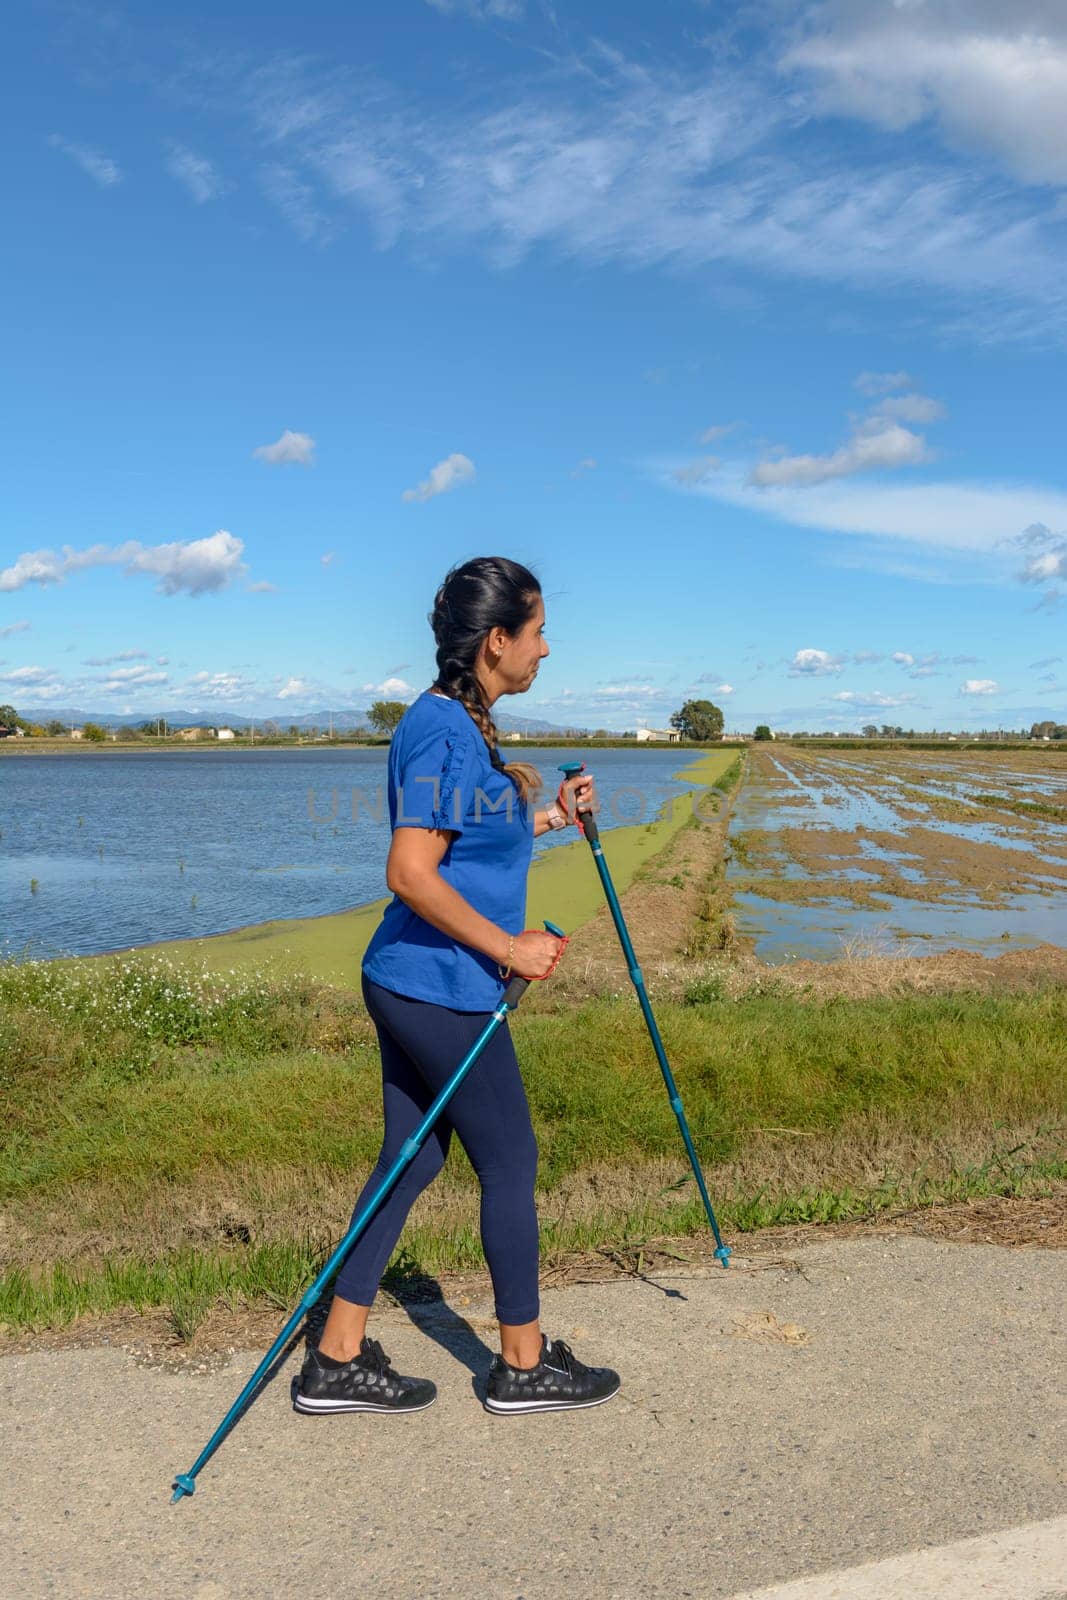 A woman in a blue shirt Nordic walking along a waterway on a sunny day with a clear blue sky, Hispanic latin woman walking with trekking poles in the Ebro Delta natural park, Tarragona, Catalonia, Spain by carlosviv